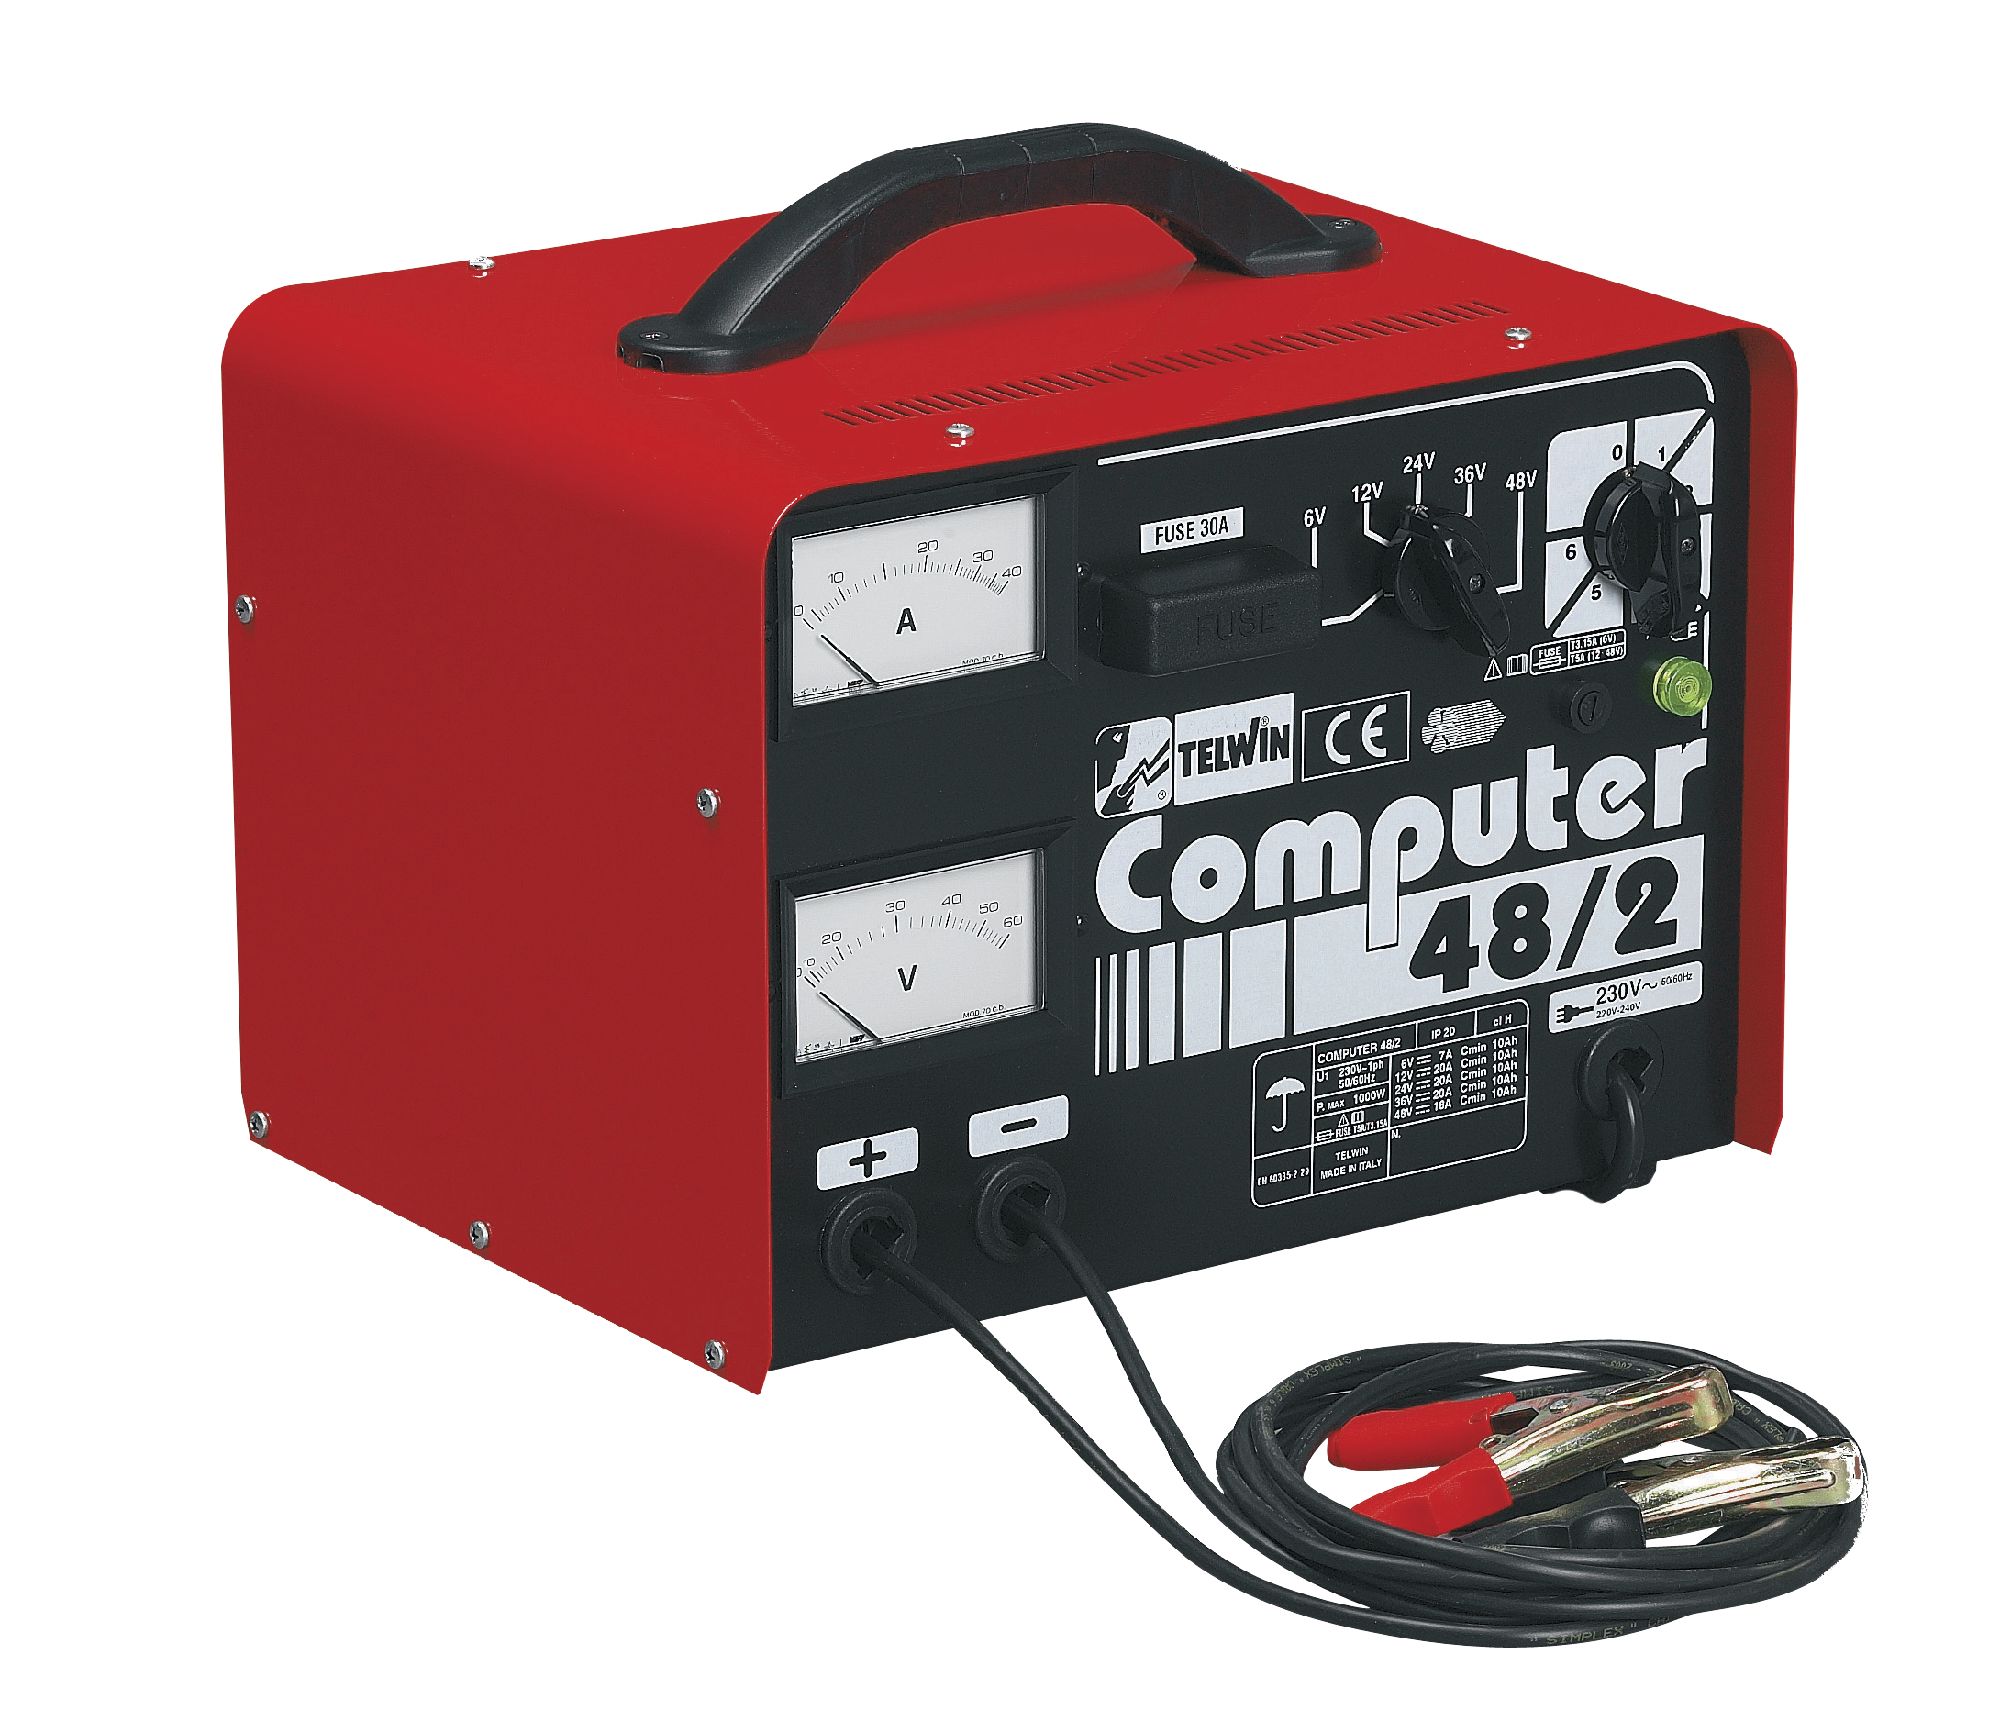 COMPUTER 48/2 MULTICHARGER | Battery chargers and starters with transformer  | Battery chargers | Vynckier tools